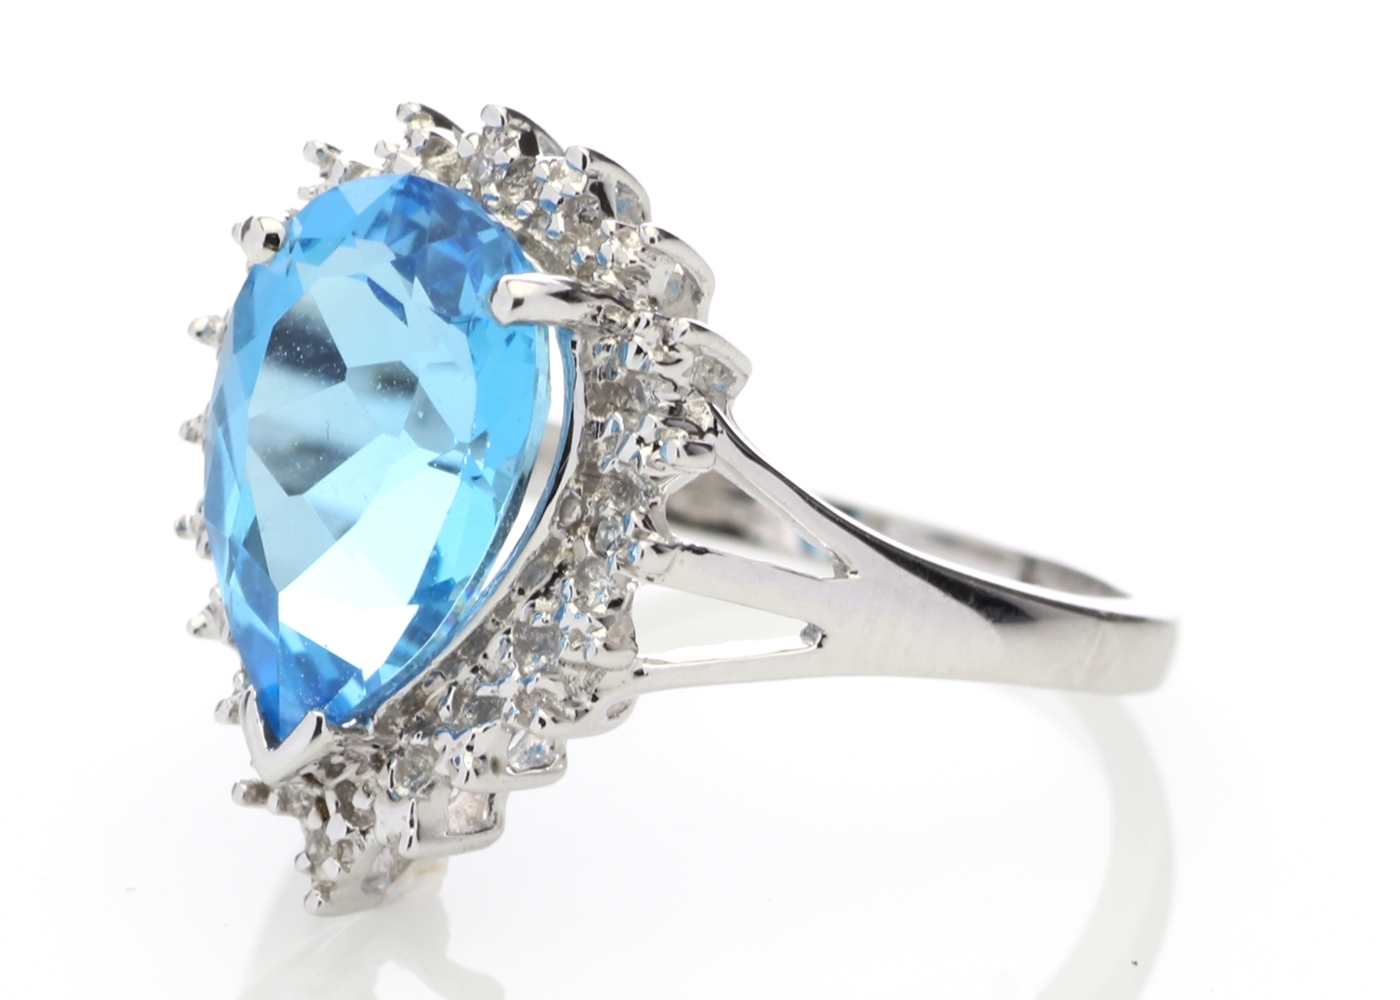 9ct White Gold Diamond And Blue Topaz Ring - Image 2 of 6